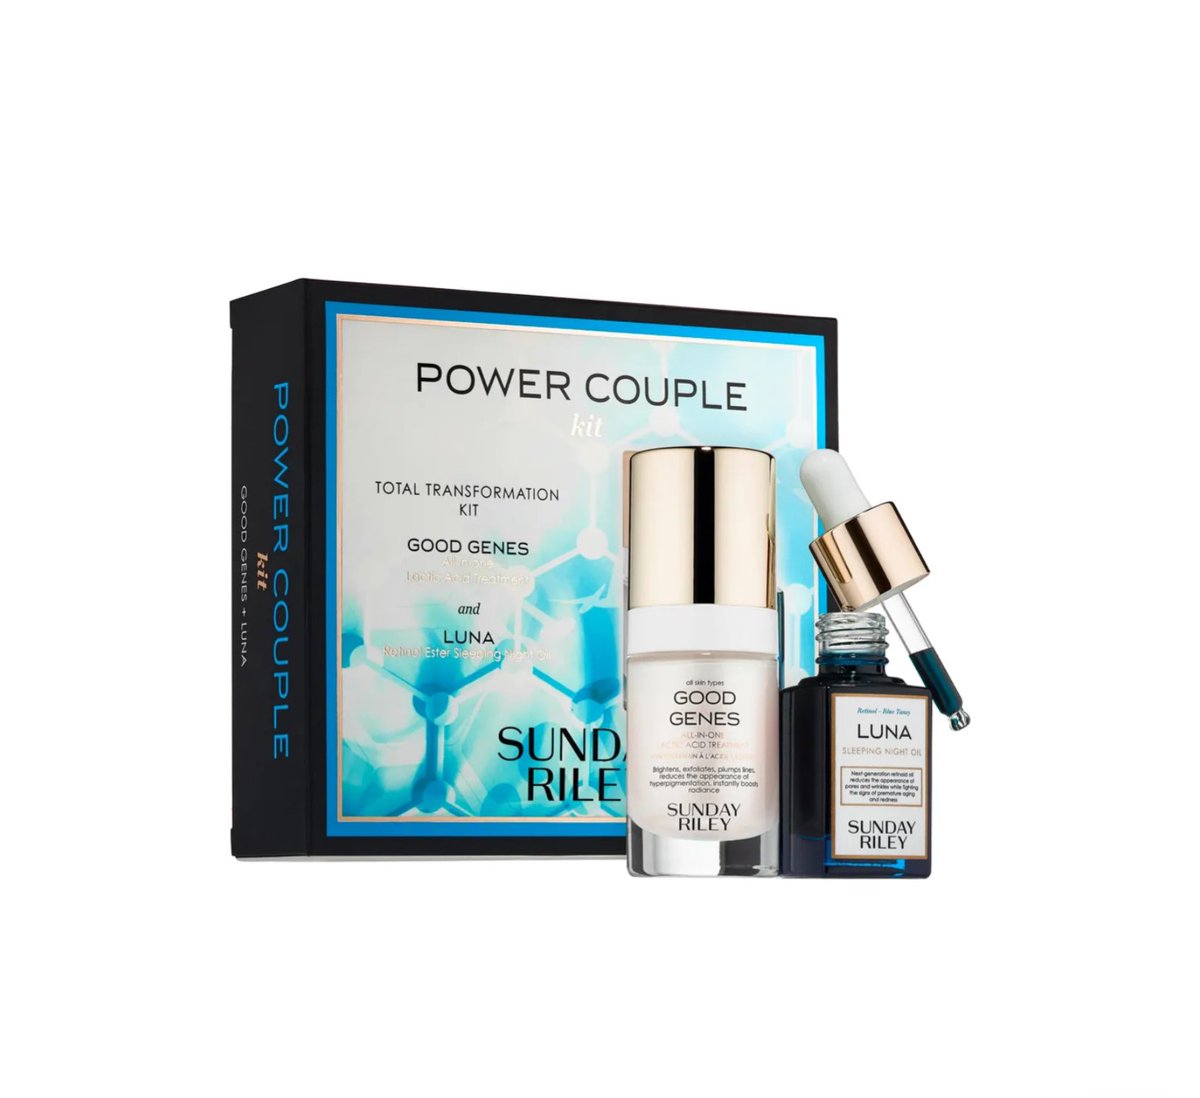 Sunday Riley's Power Couple Duo: Total Transformation Kit! Unleash the power of Good Genes All-In-One Lactic Acid Treatment & Luna Sleeping Night Oil for a radiant complexion.  
BUY HERE: invol.co/clkhpr7
#SundayRiley #PowerCouple #TotalTransformation #GoodGenes #LunaOil